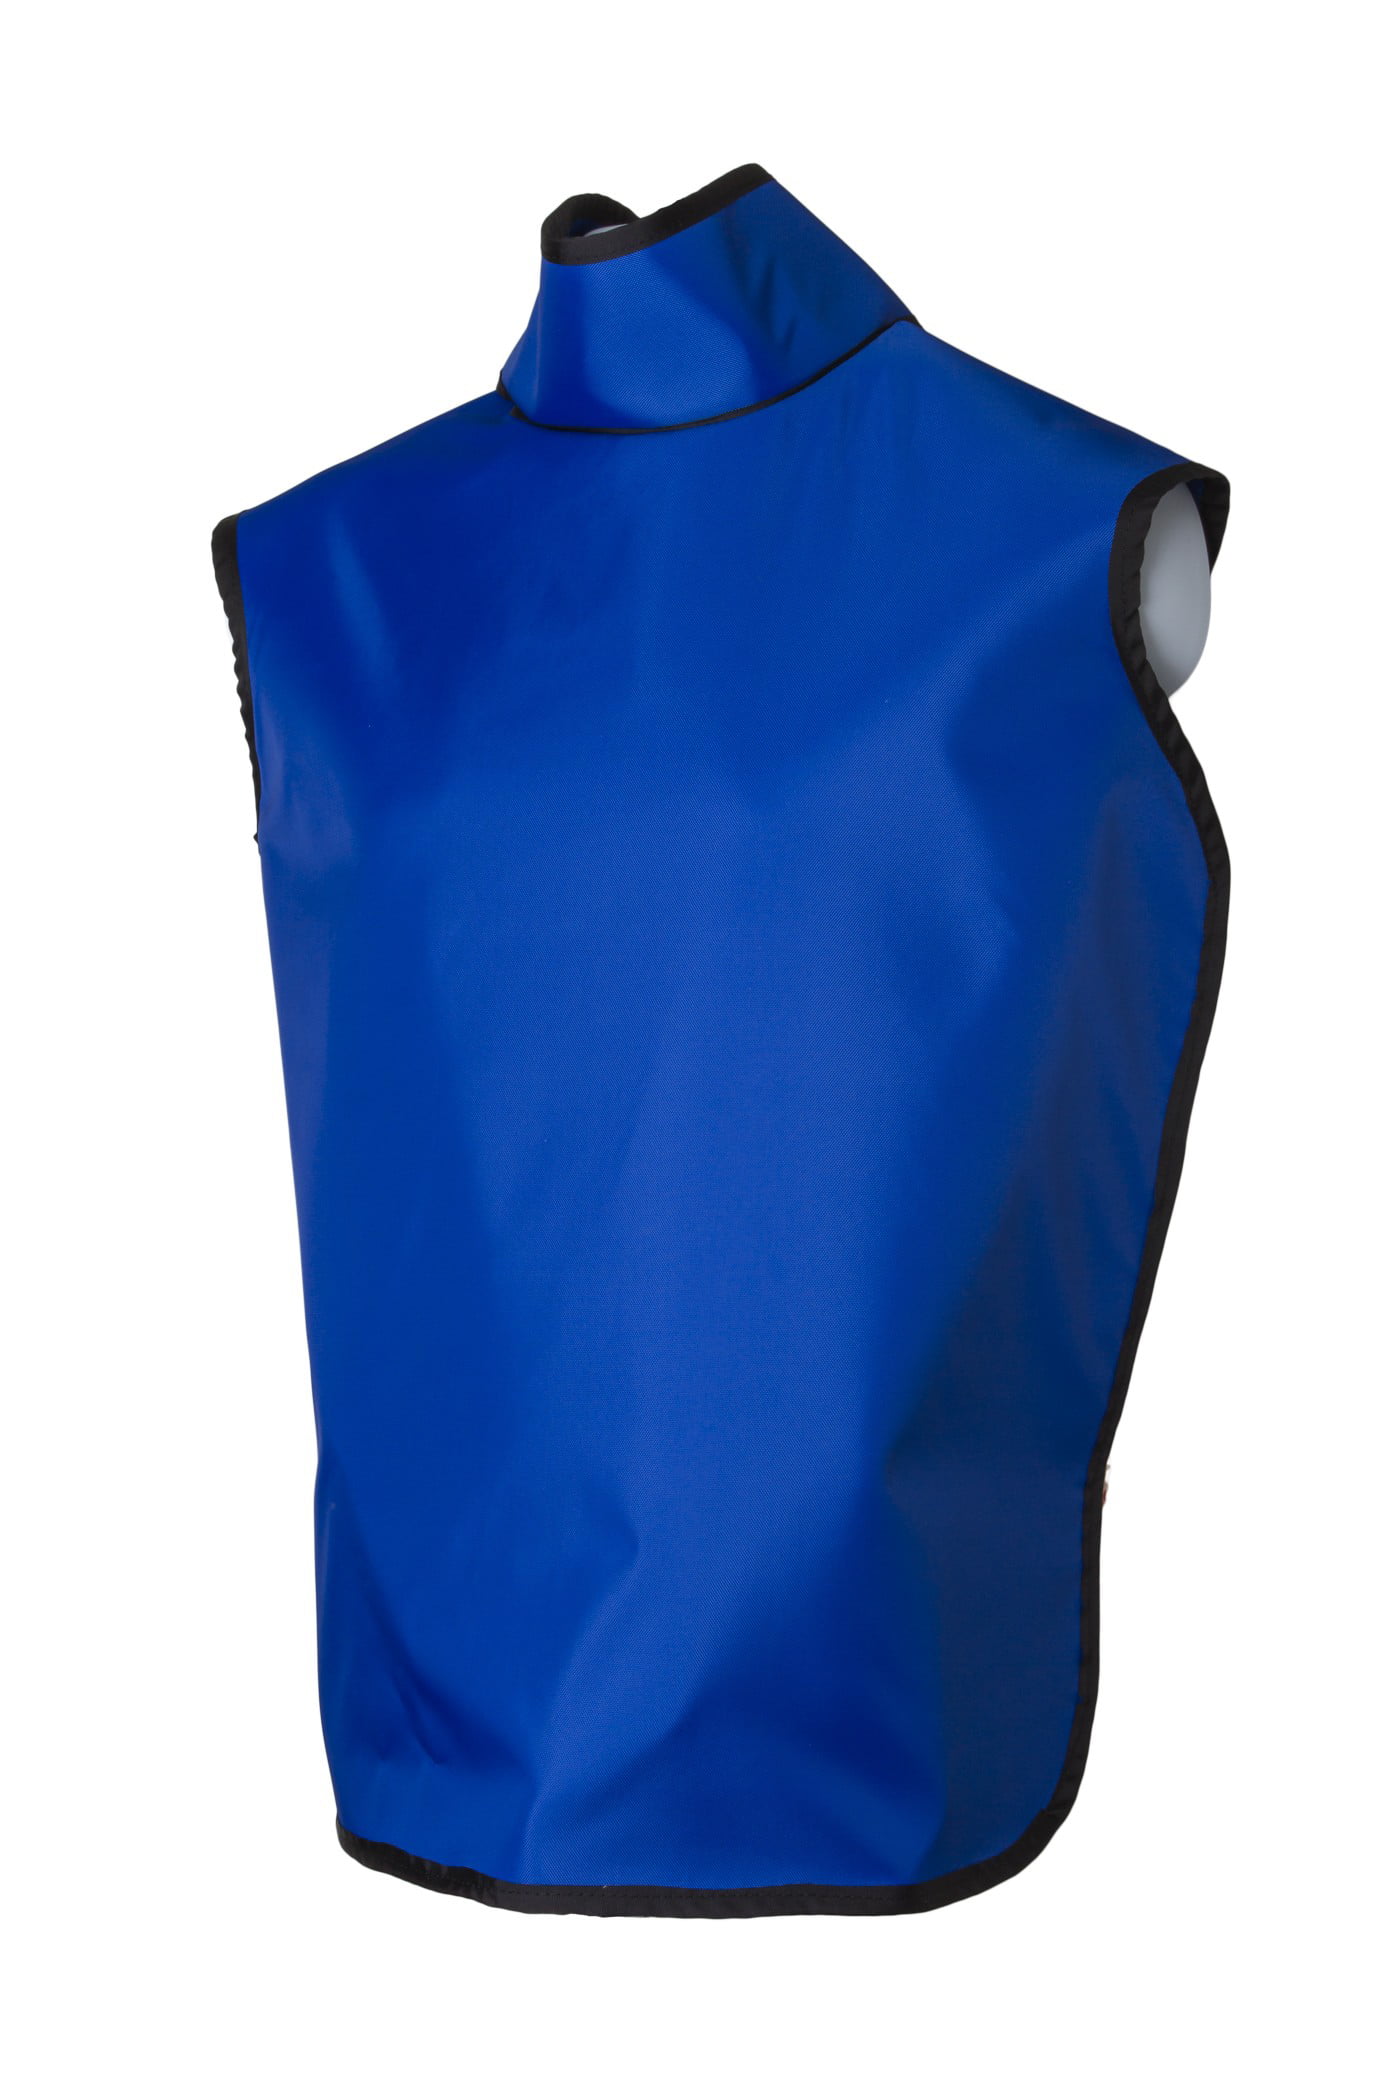 Dental Radiation Lead Apron with Collar and Hanging Loops,0.5mmpb 